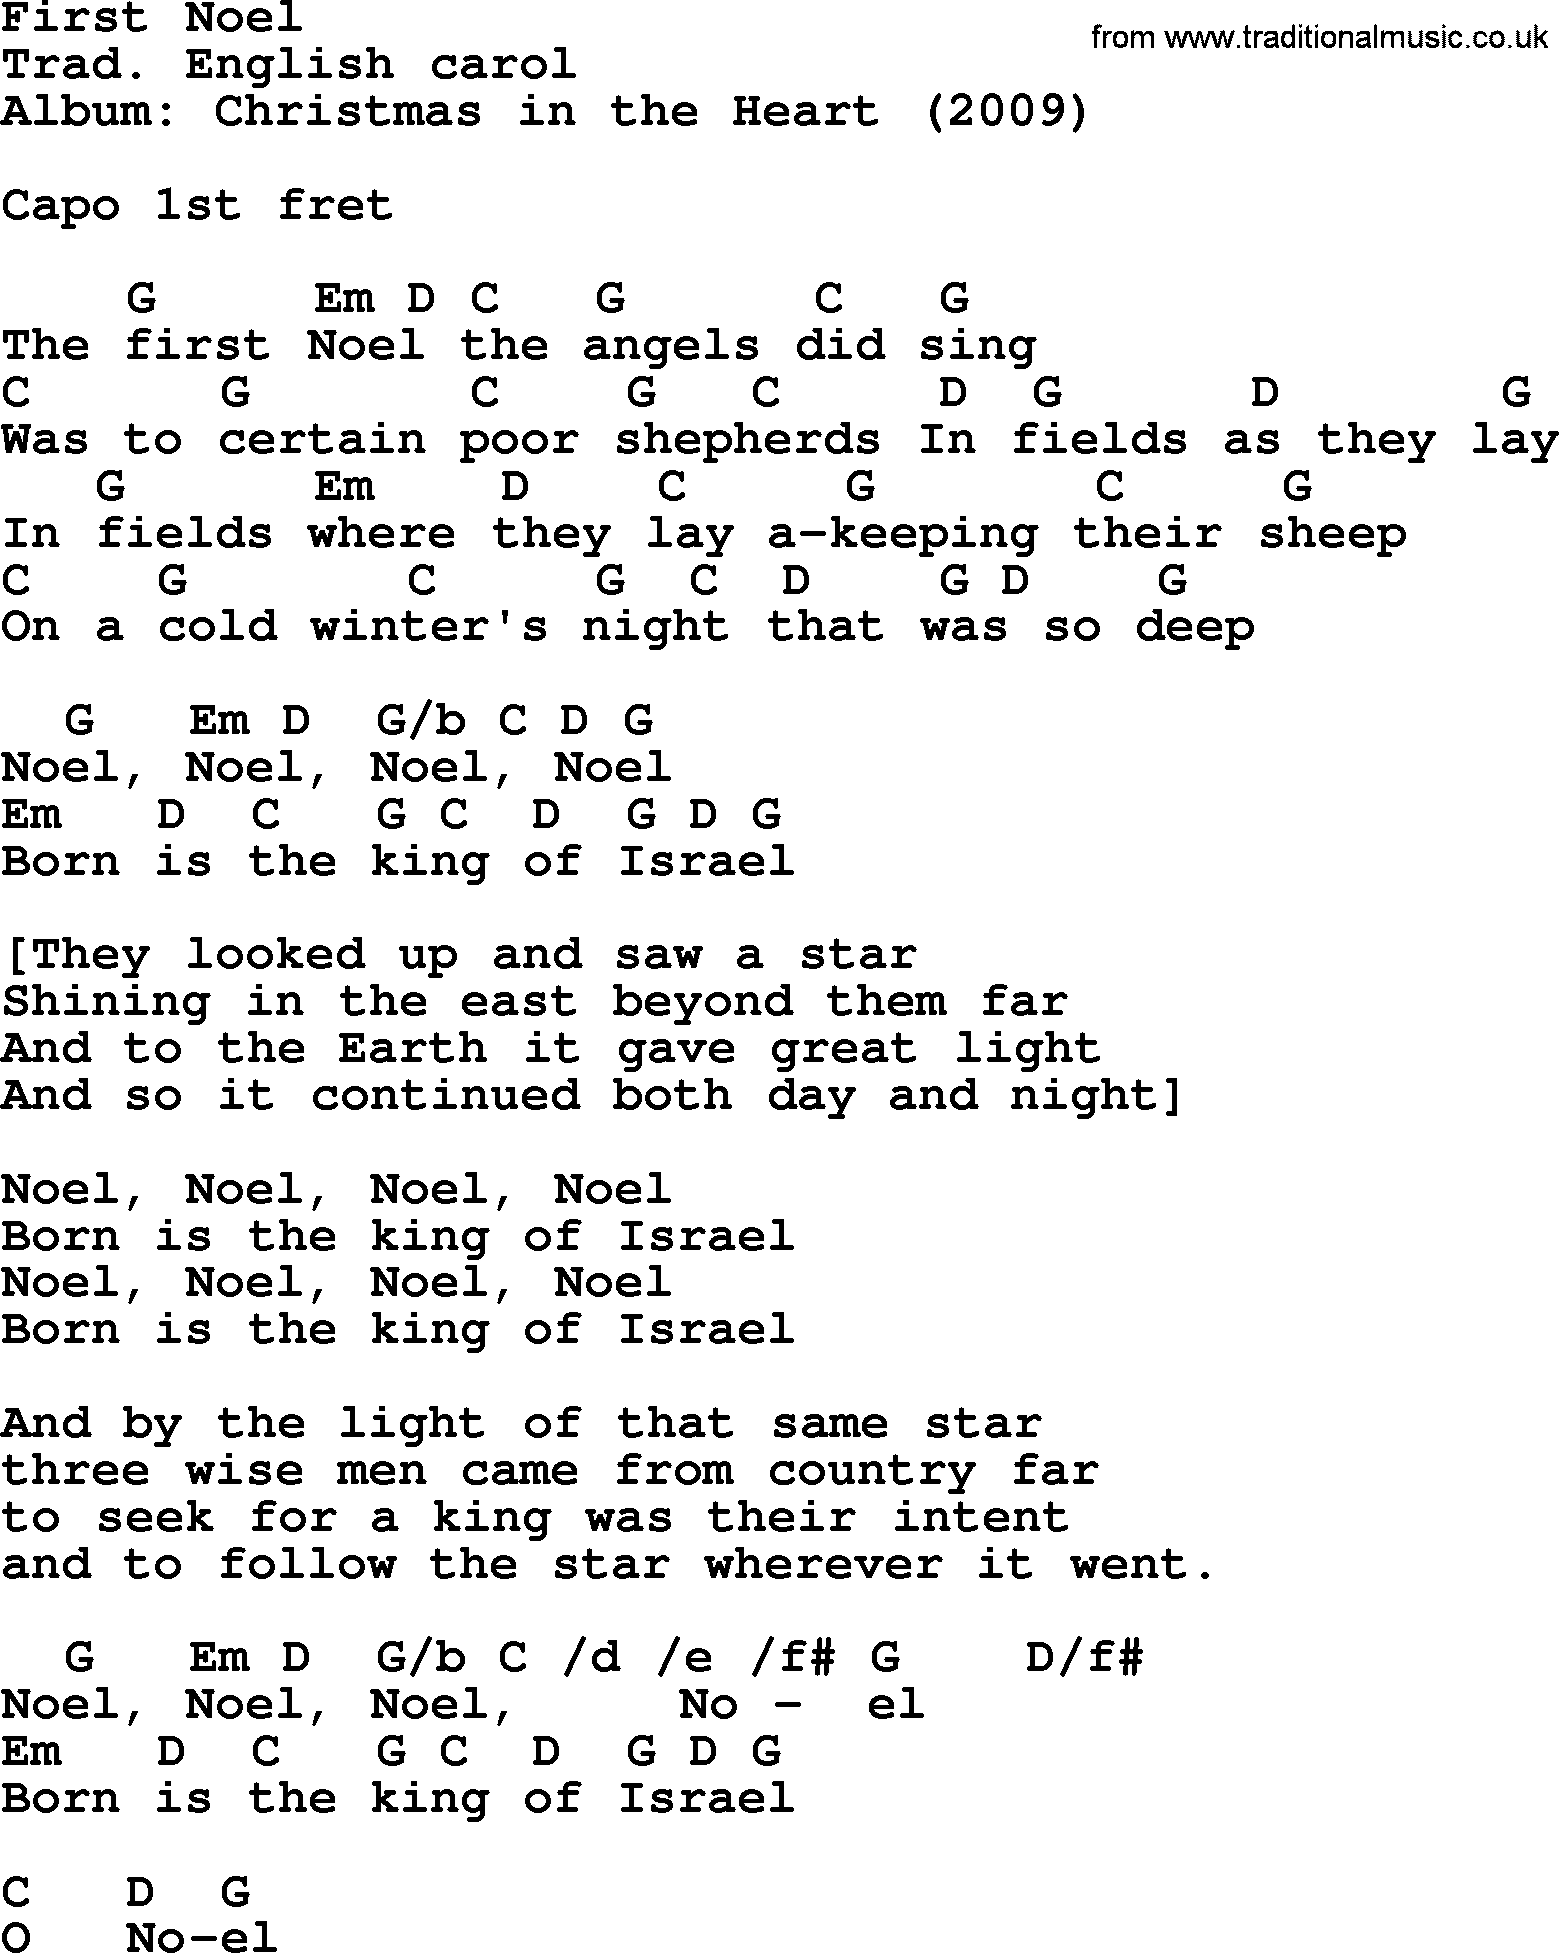 Bob Dylan song, lyrics with chords - First Noel